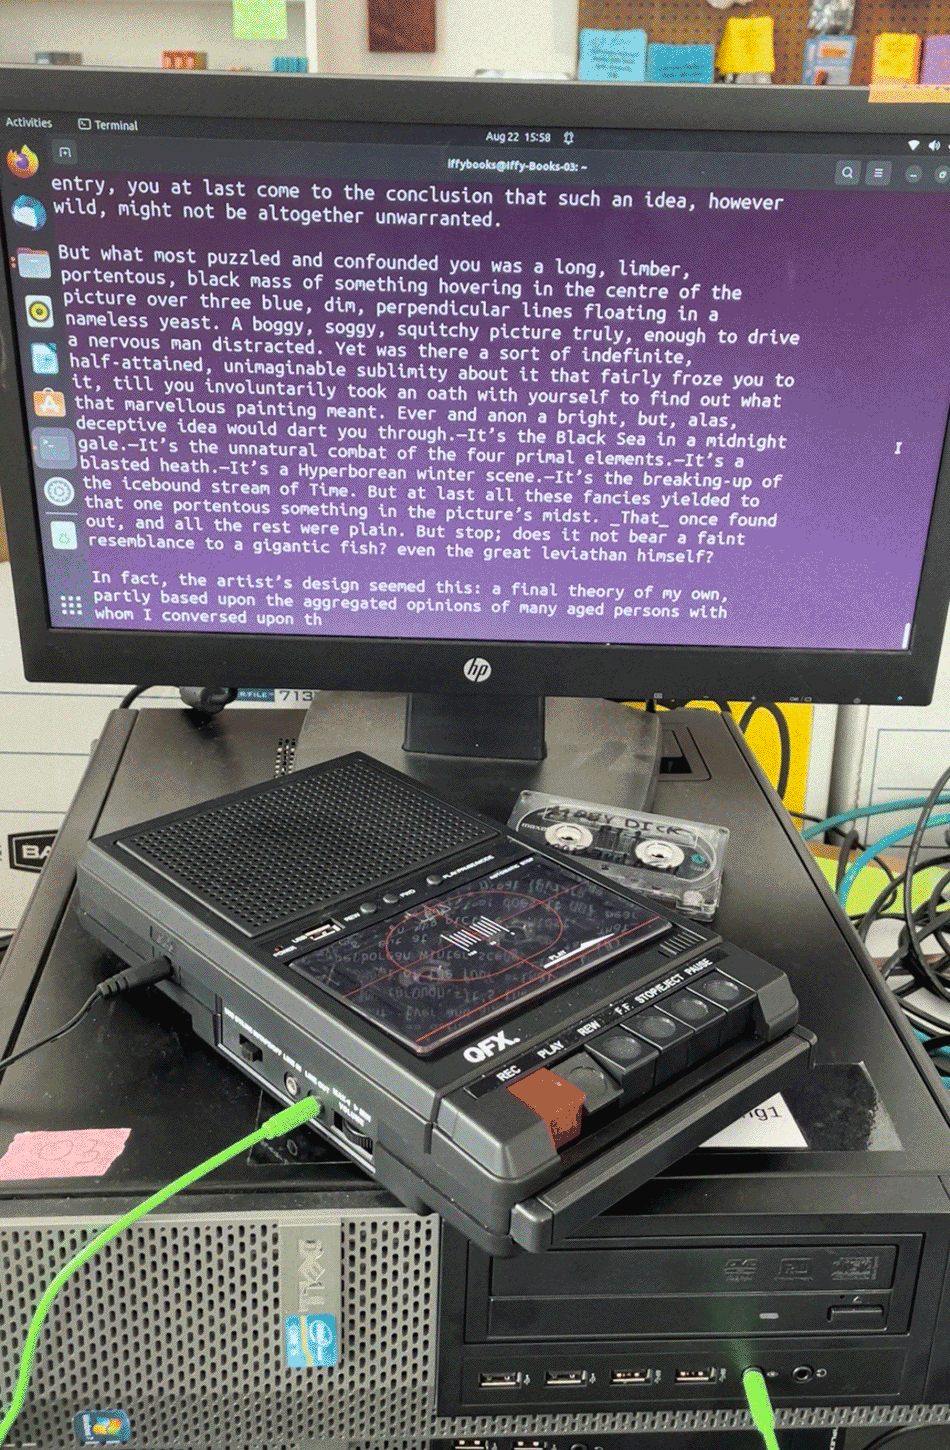 Photo of an audio cassette player attached to a computer, with the play button pressed down. Onscreen is an excerpt from Moby Dick, with a paragraph beginning, "But what most puzzled and confounded you was a long, limber, portentous, black mass of something hovering in the centre of the picture of three blue, dim, perpendicular lines floating in a nameless yeast."